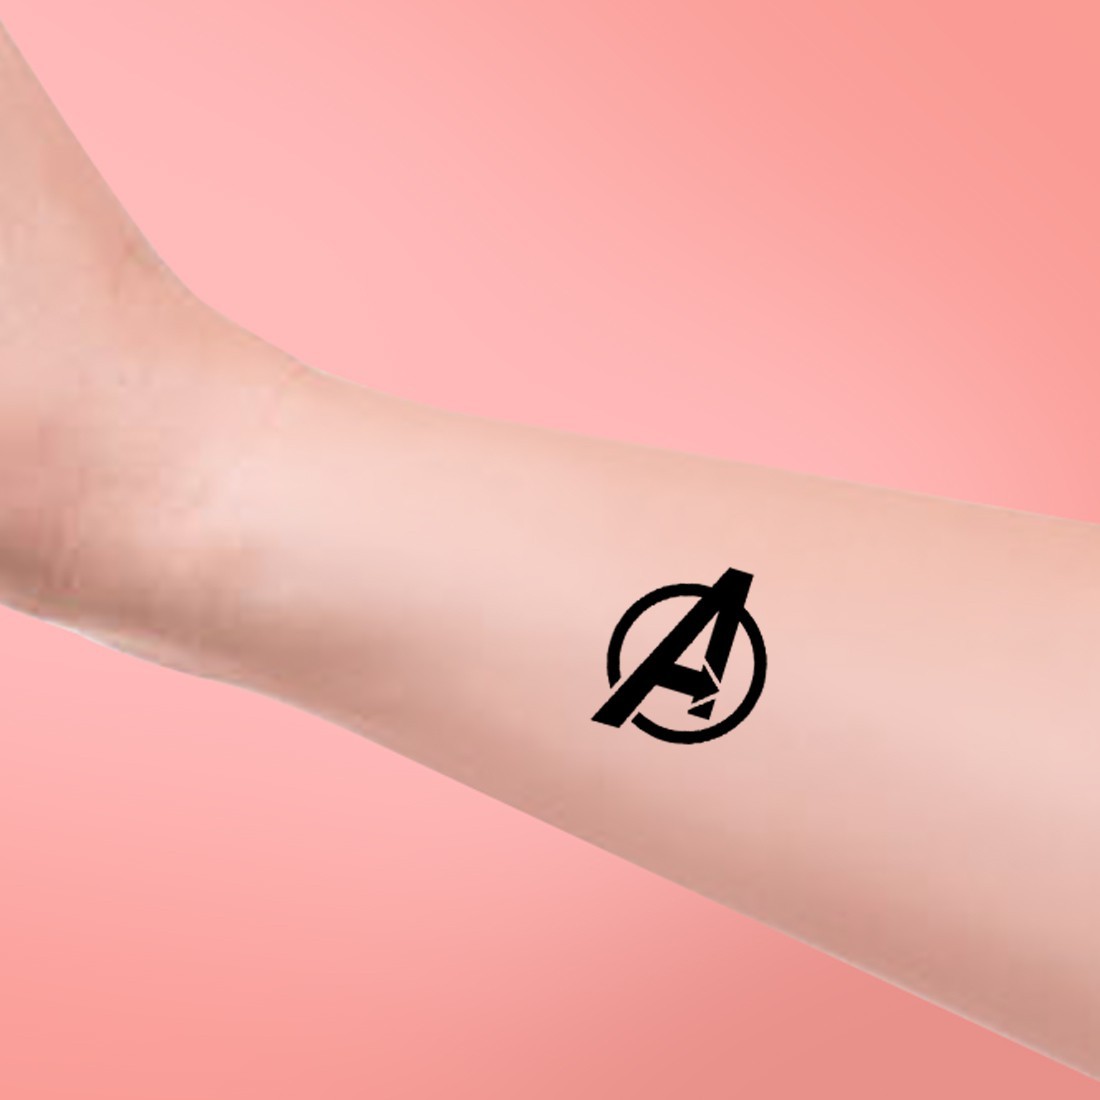 Buy Kids Temporary Tattoos Avengers Tattoos Captain America Online in India   Etsy